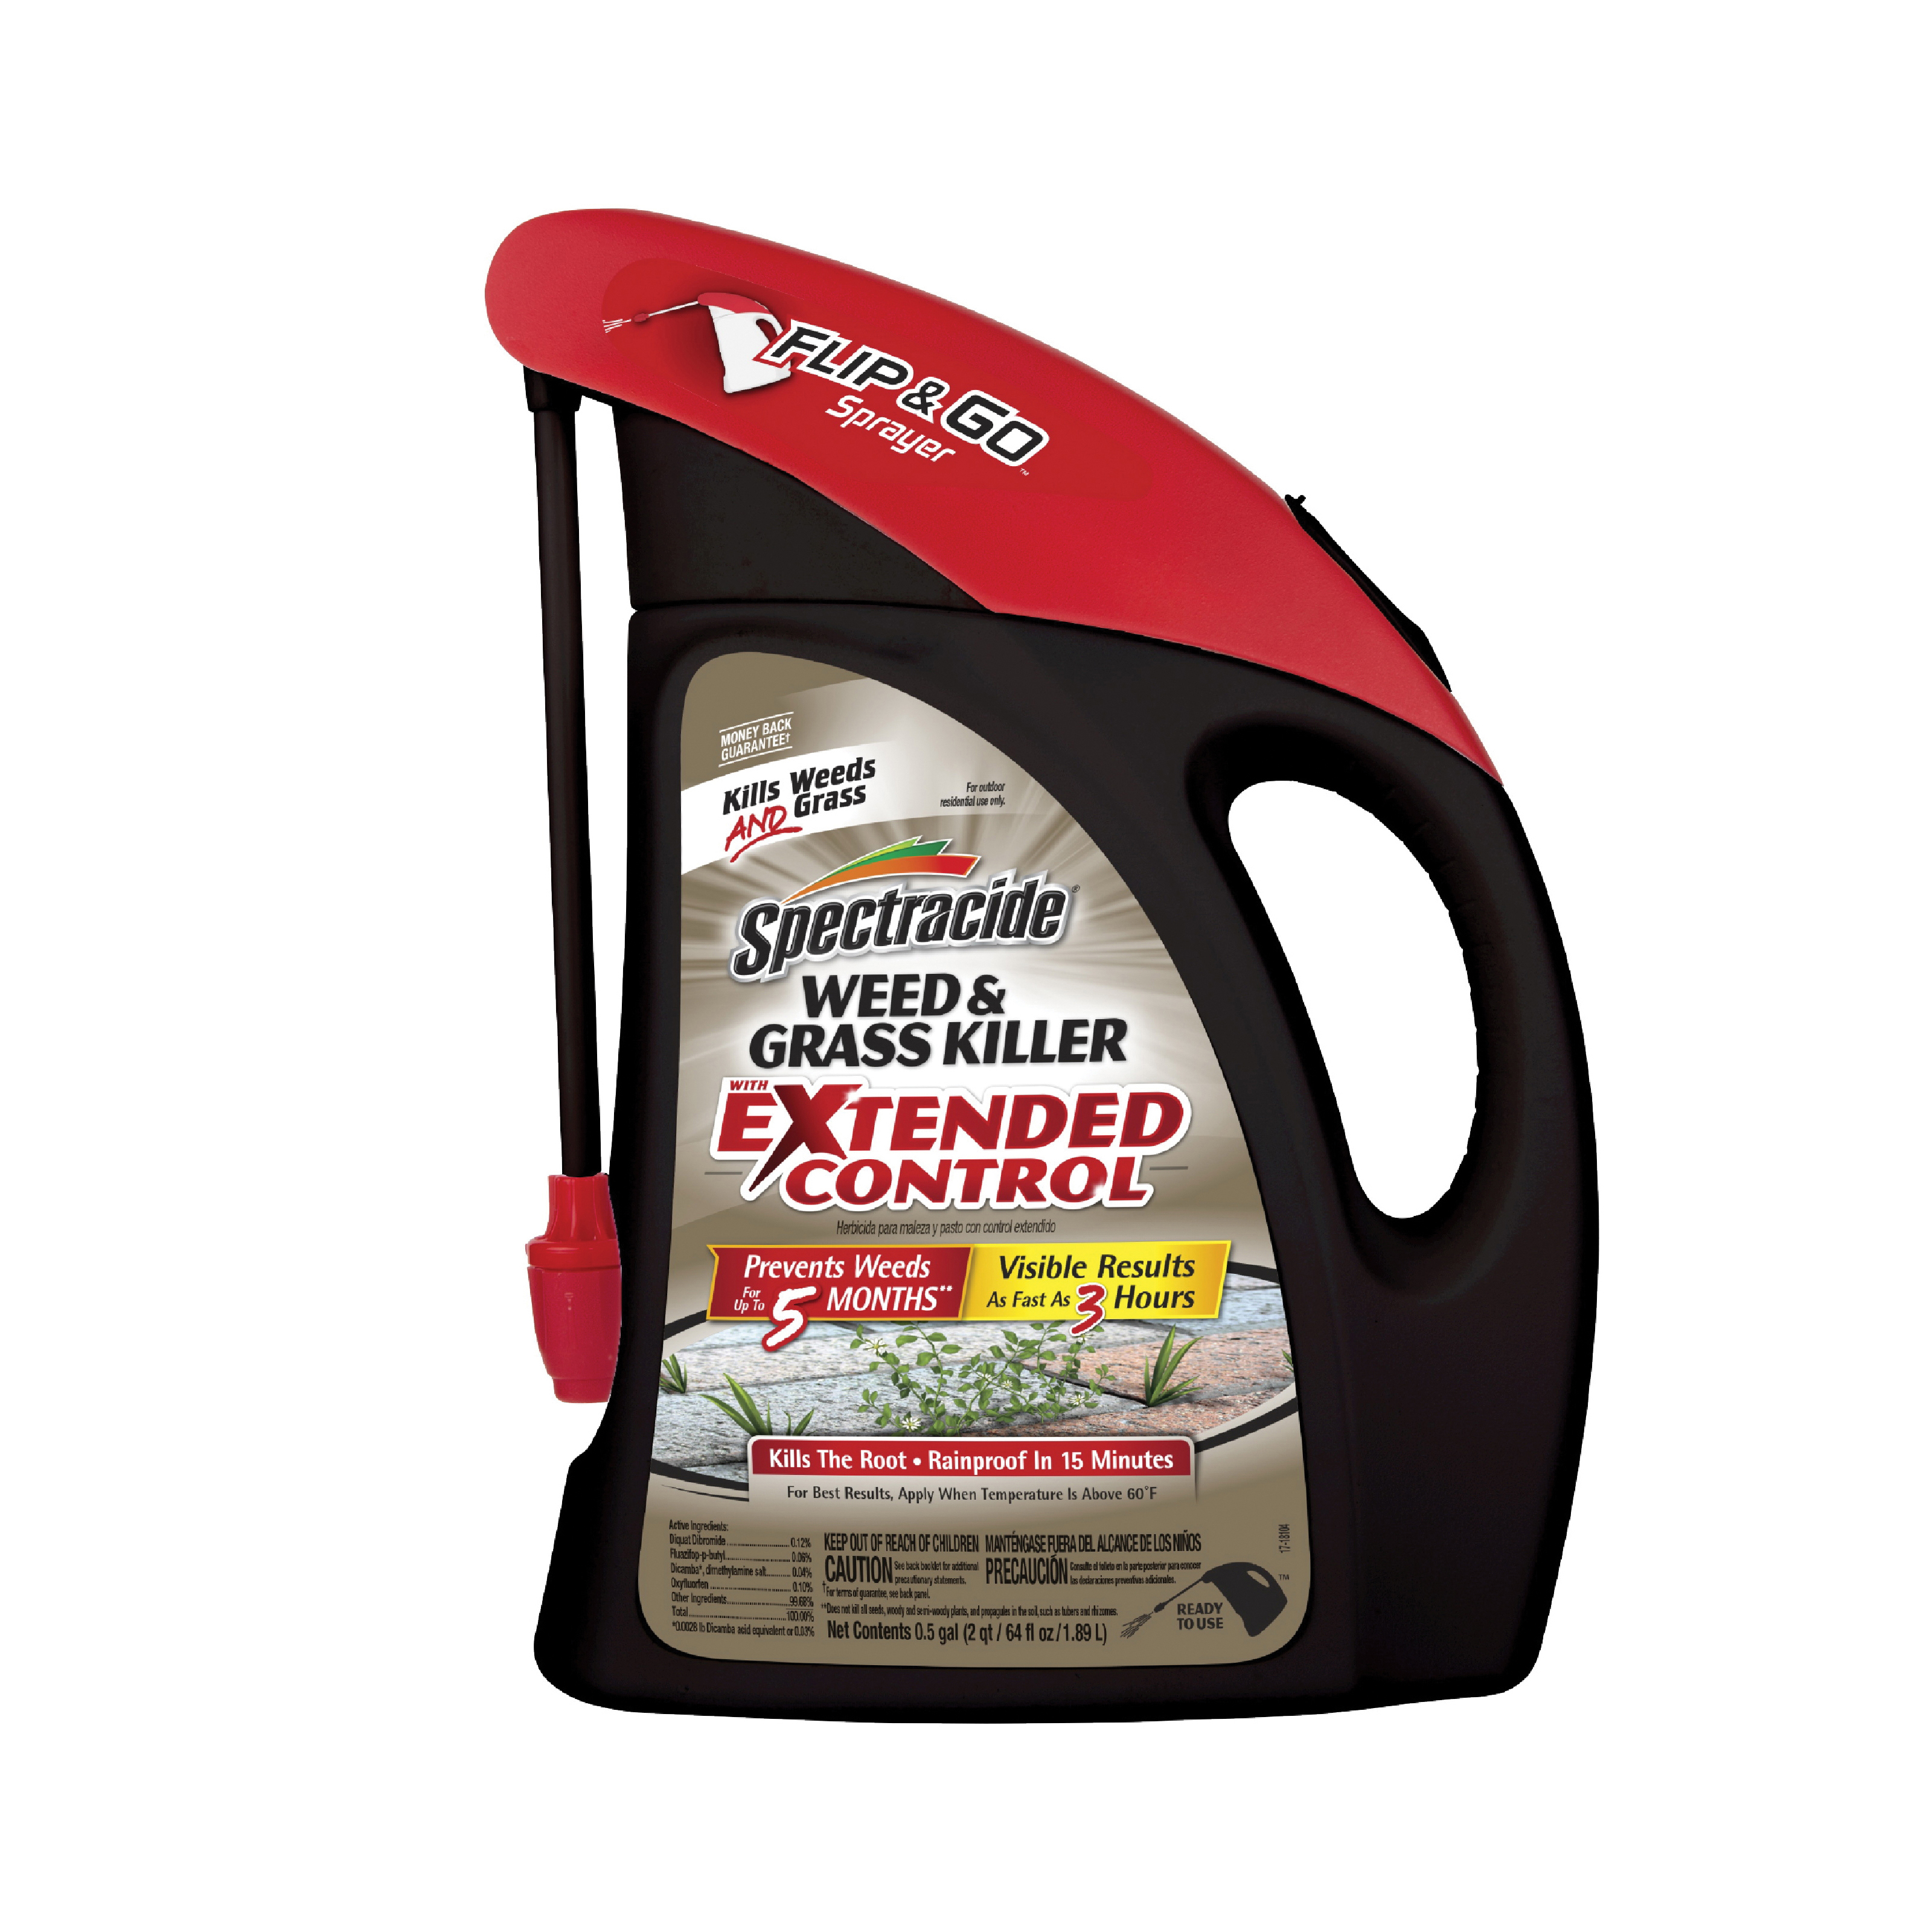 HG-97049 Weed and Grass Killer Extended Control, Liquid, 64 oz